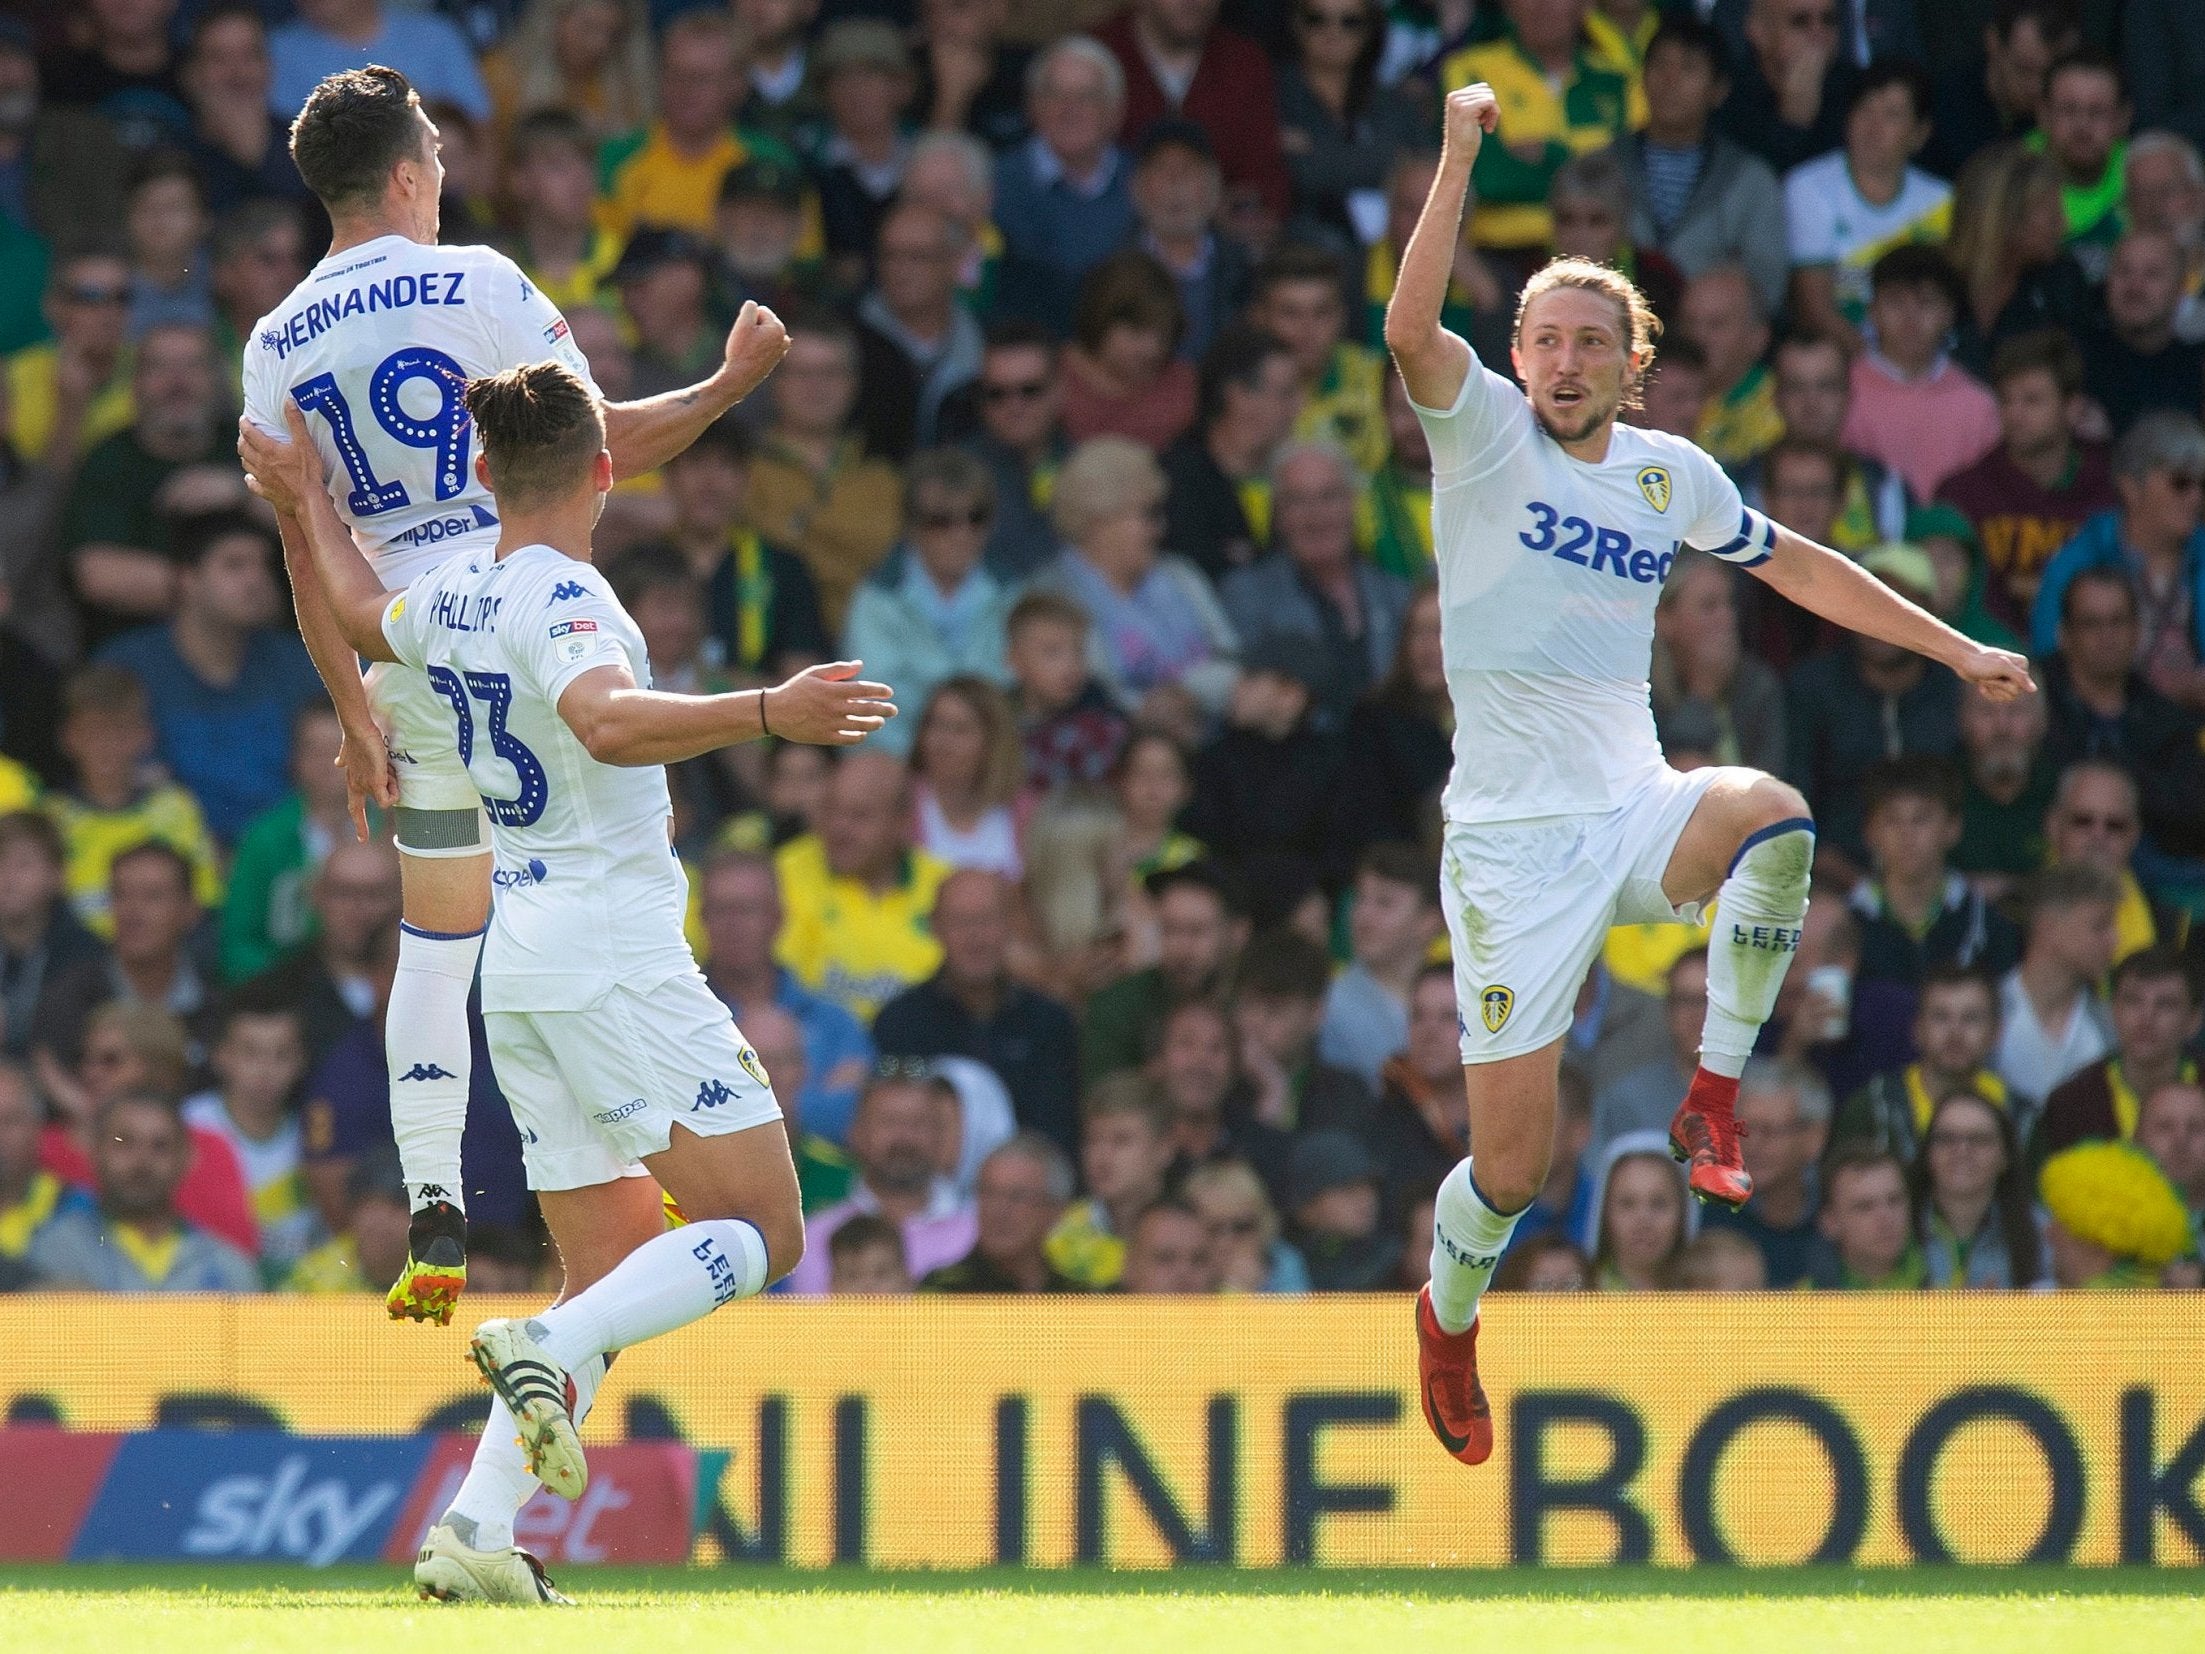 Pablo Hernandez (top left) celebrates scoring his side's third goal of the game